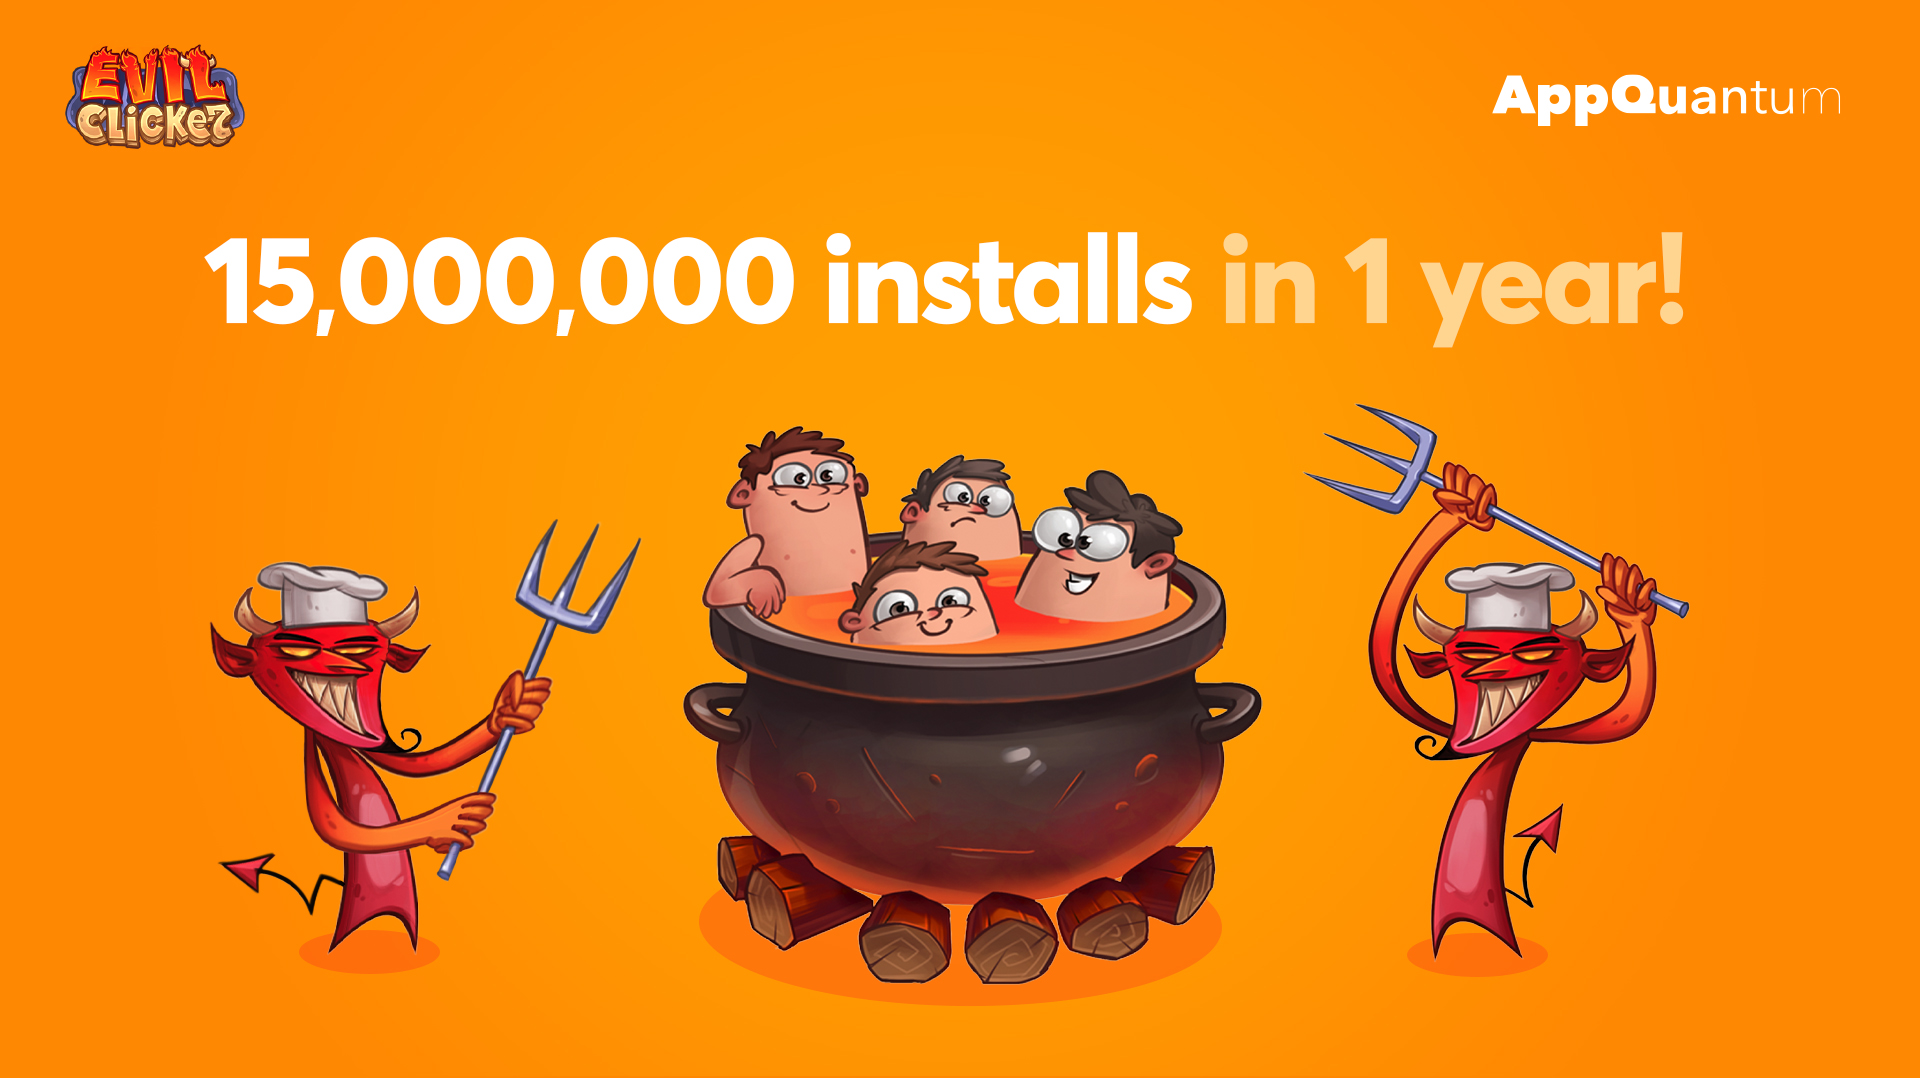 We Made More Than 15,000,000 Installs for Evil Clicker in 1 Year! 